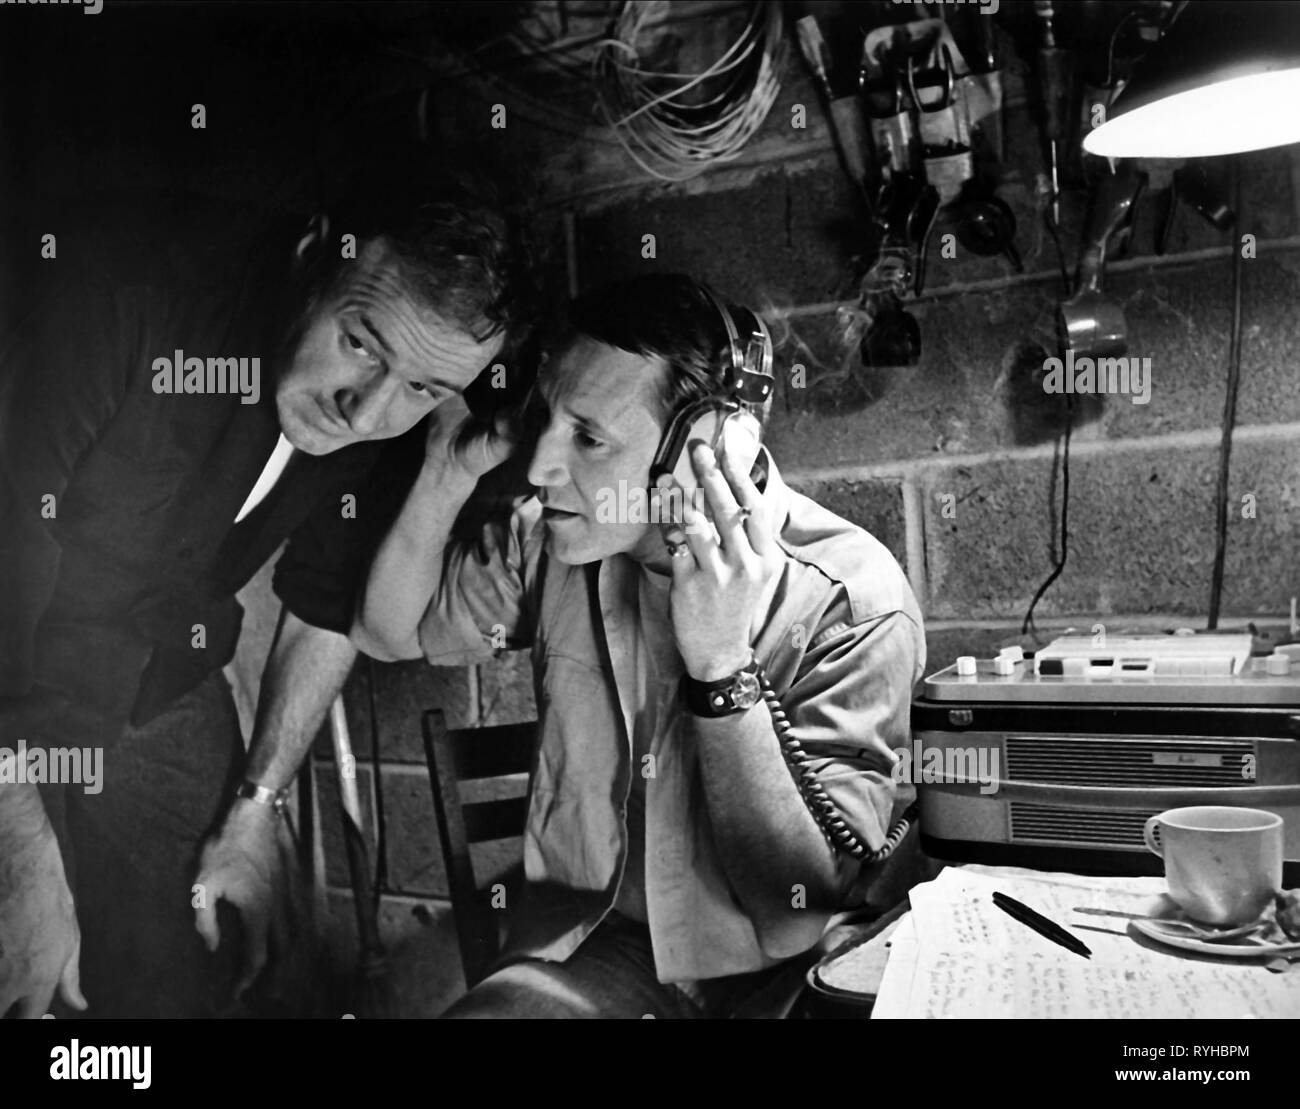 GENE HACKMAN, ROY SCHEIDER, THE FRENCH CONNECTION, 1971 Stock Photo